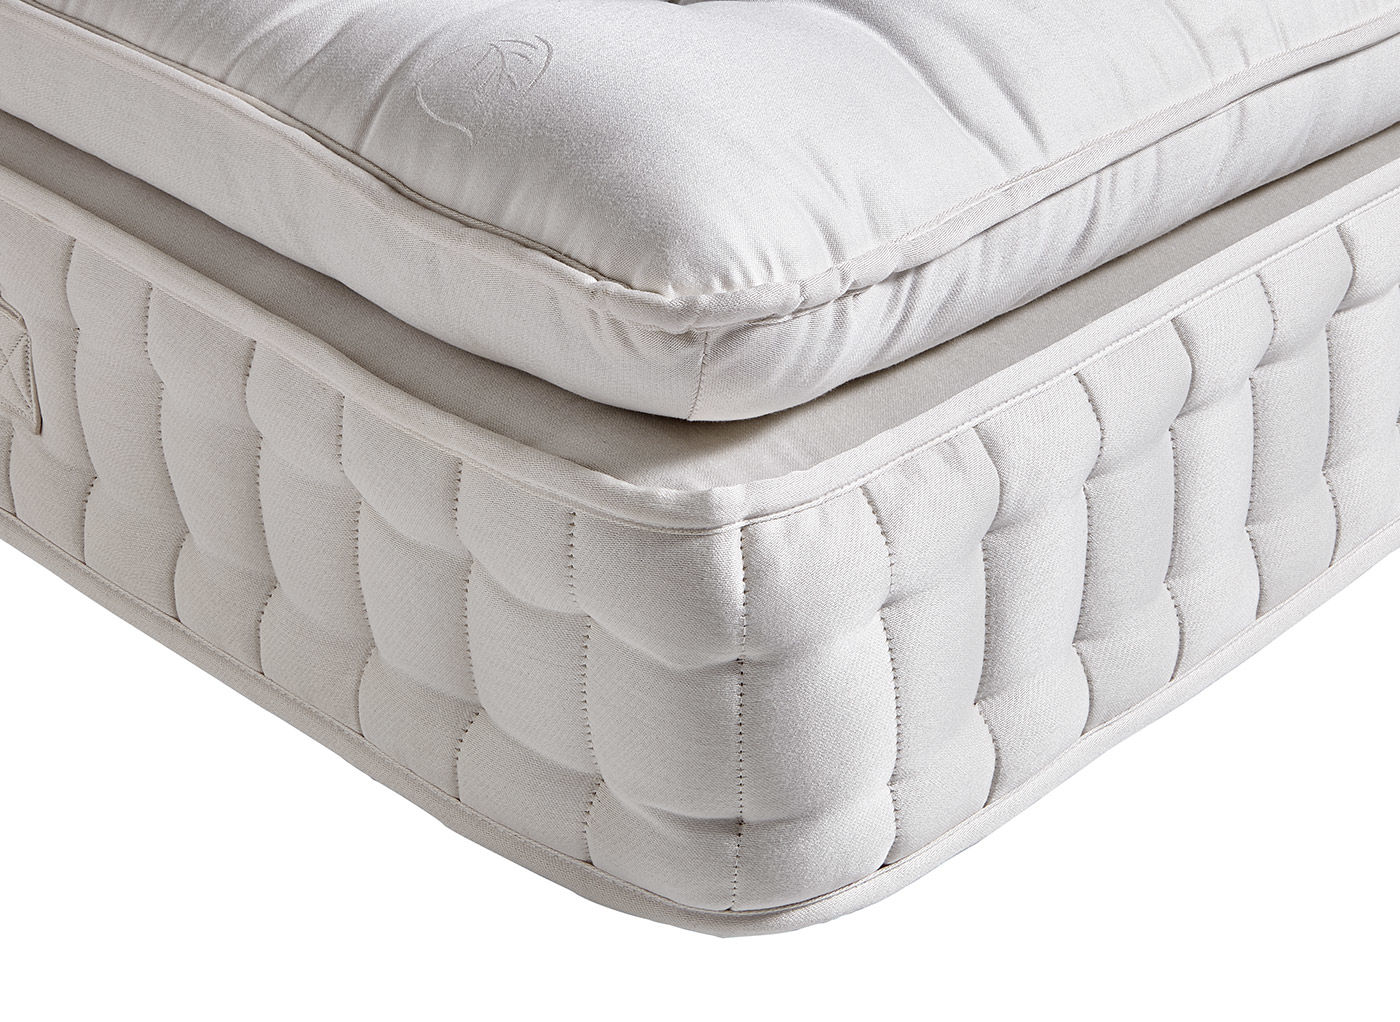 flaxby 3000 mattress review